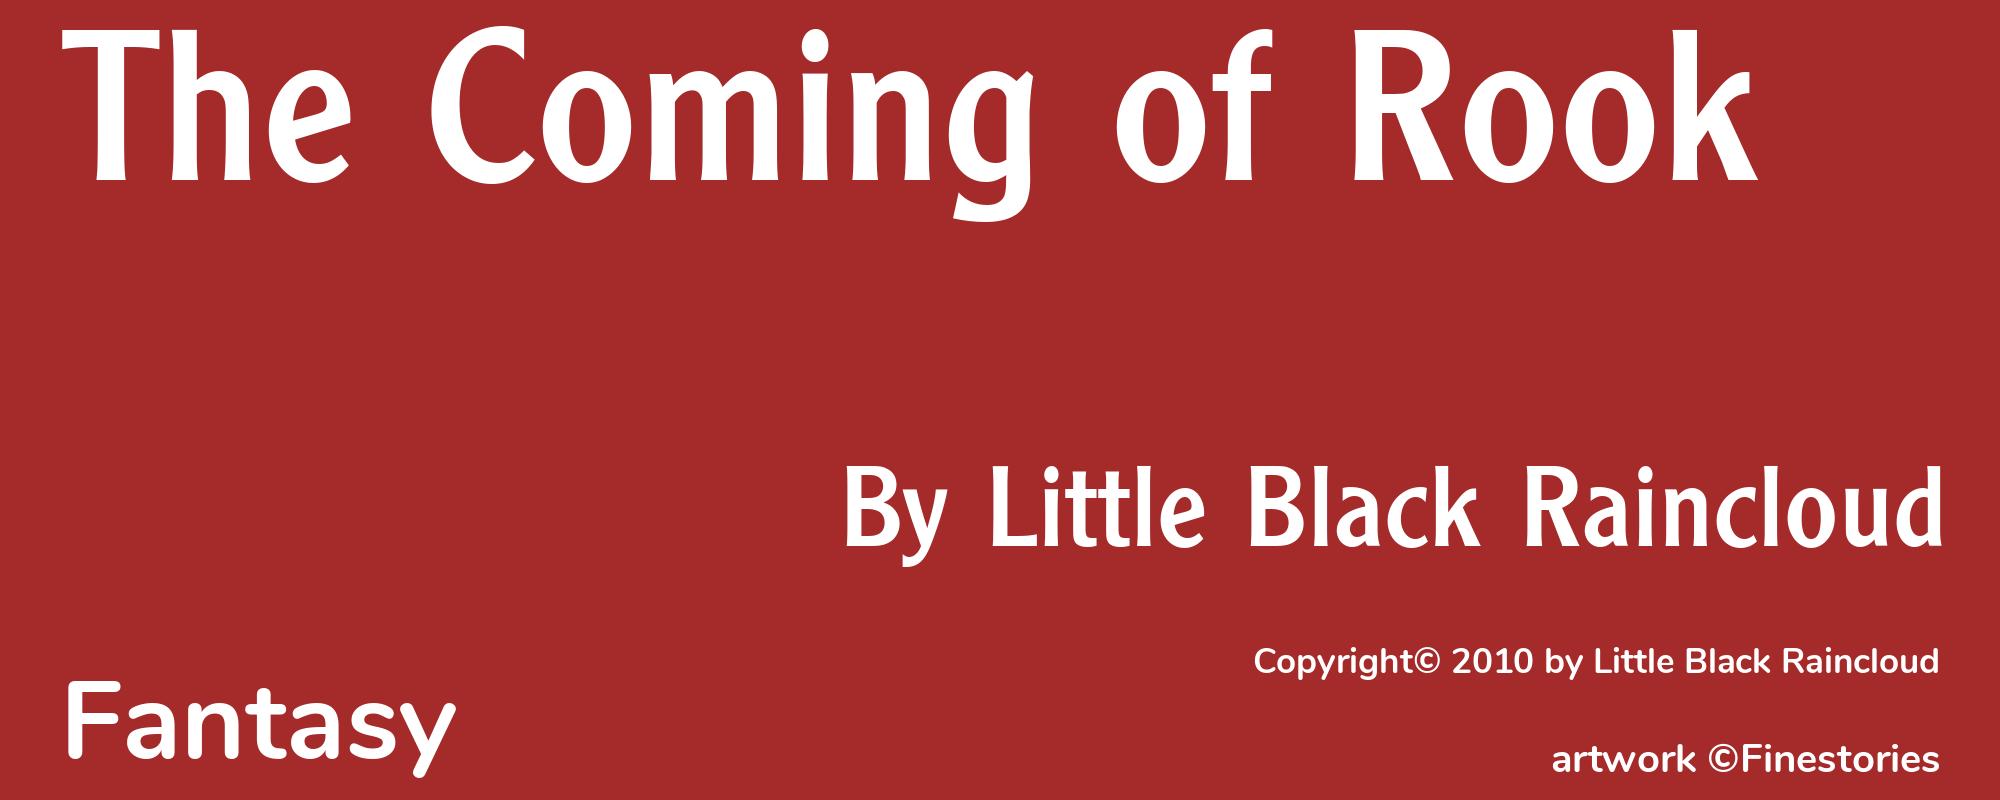 The Coming of Rook - Cover